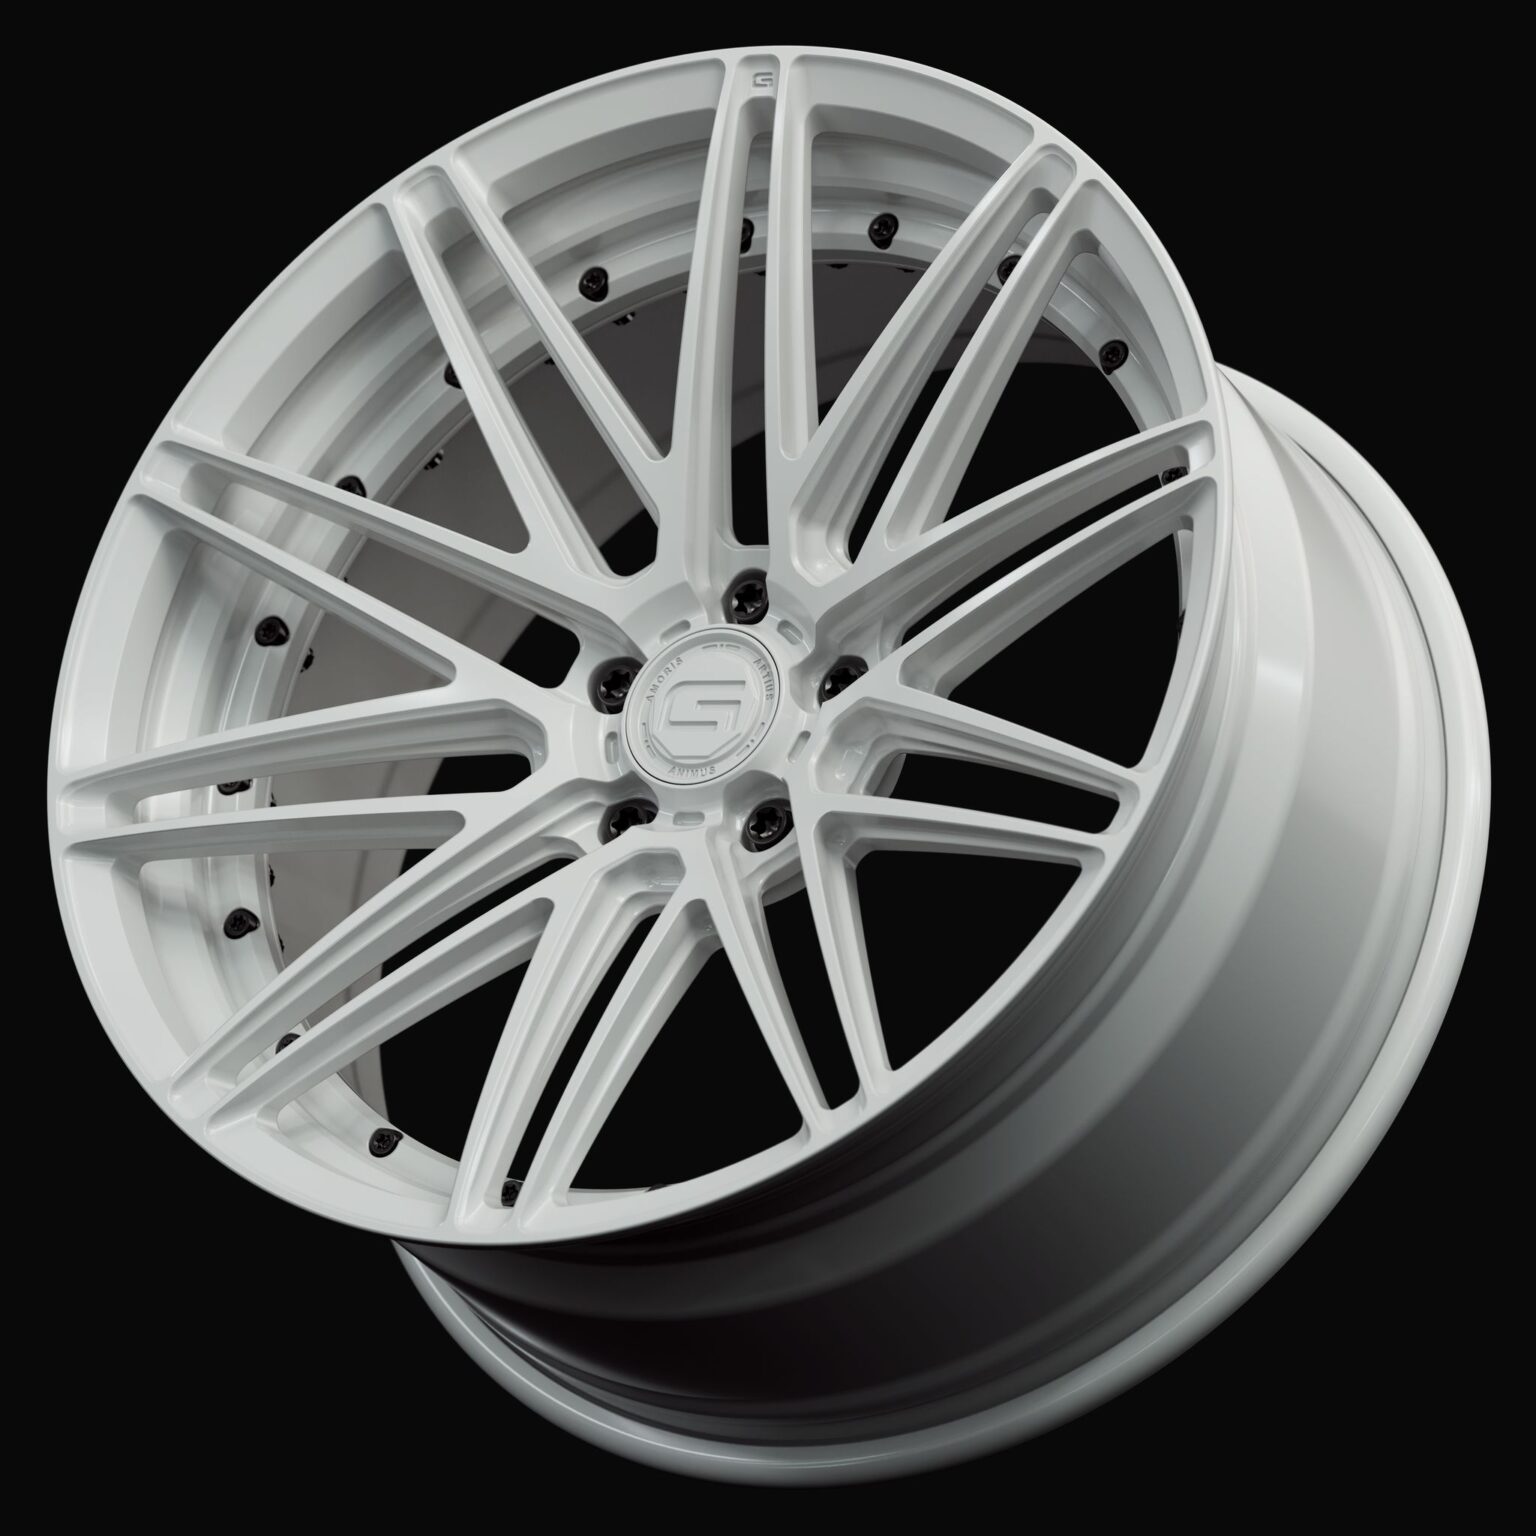 Three-quarter view of a white G59 duoblock wheel from Govad Forged Track series